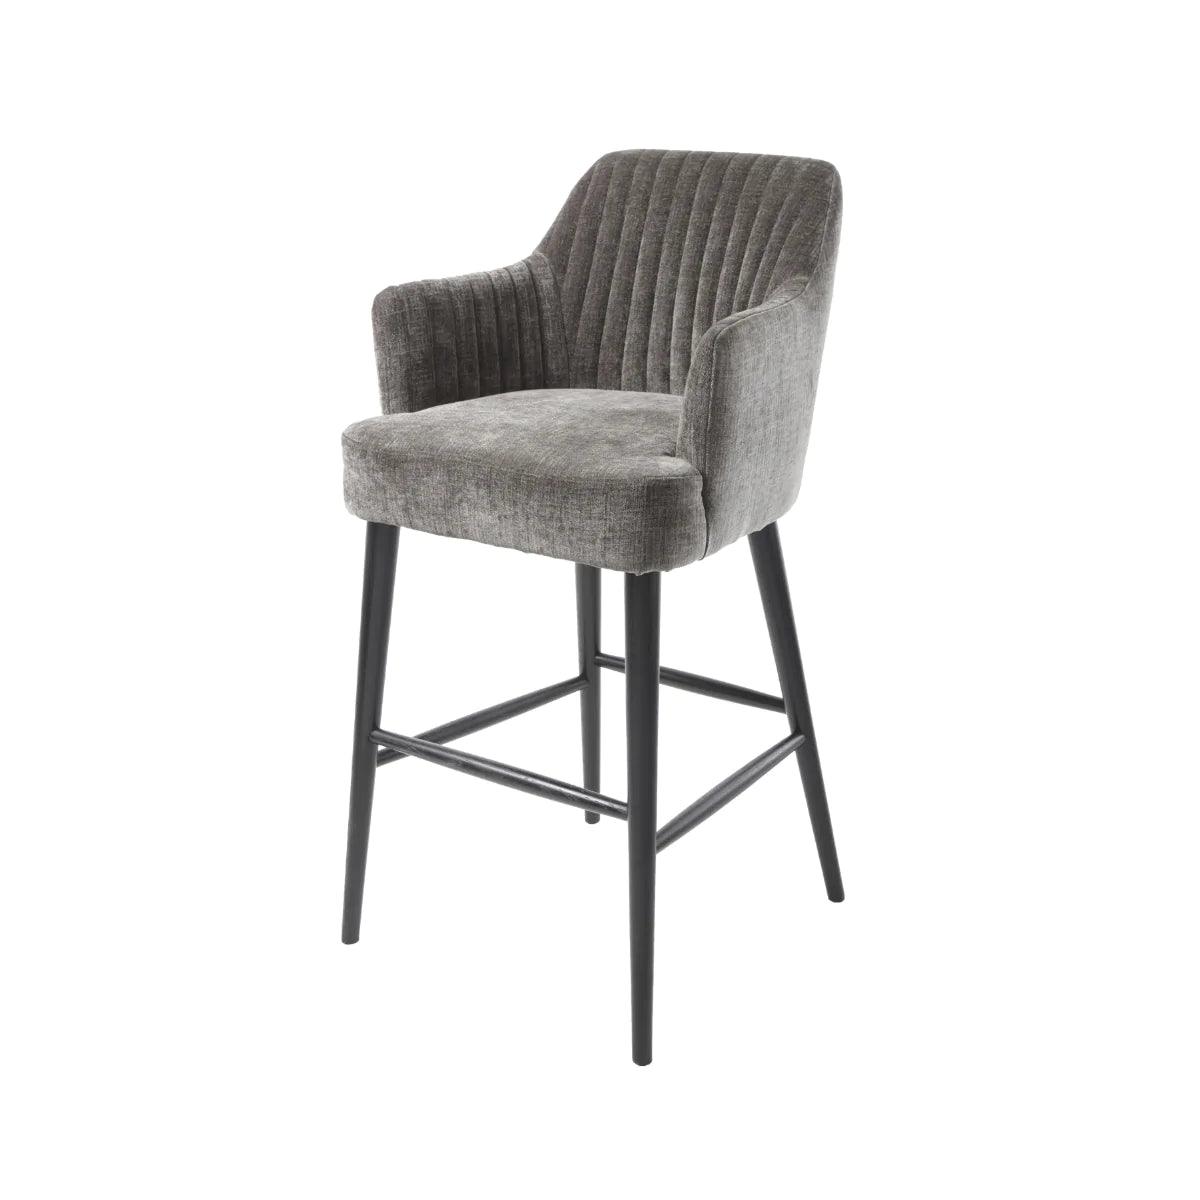 RV Astley Blisco Stool In Mouse-Esme Furnishings